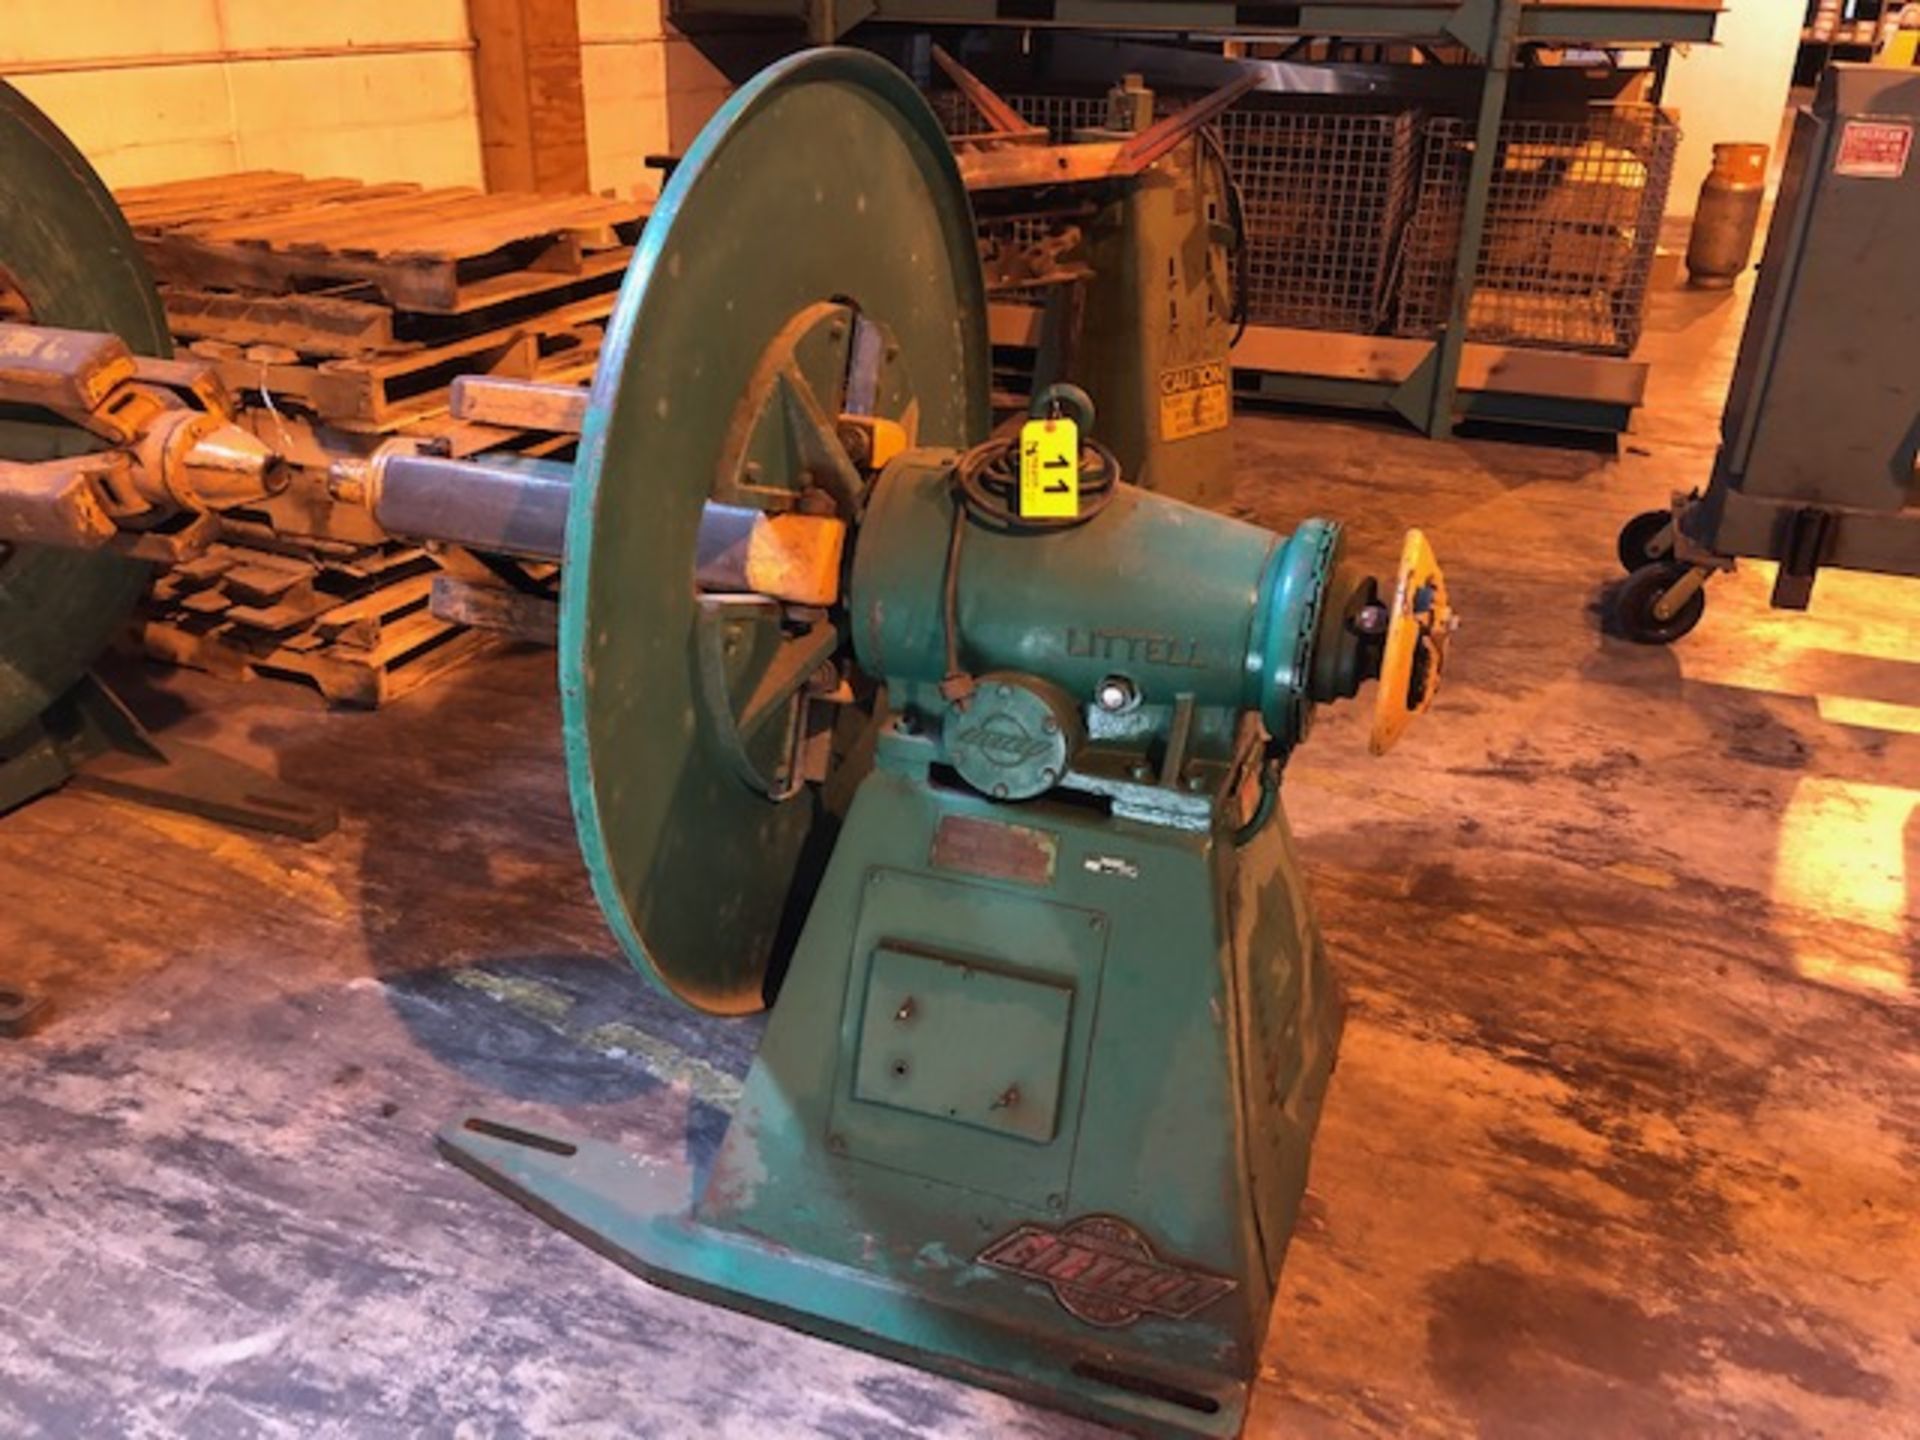 LITTELL 4,000 LB. MODEL 40-18 STOCK UNCOILER, S/N S-1163-67-2 15-20-18, WITH KEEPERS Loading Fee: $